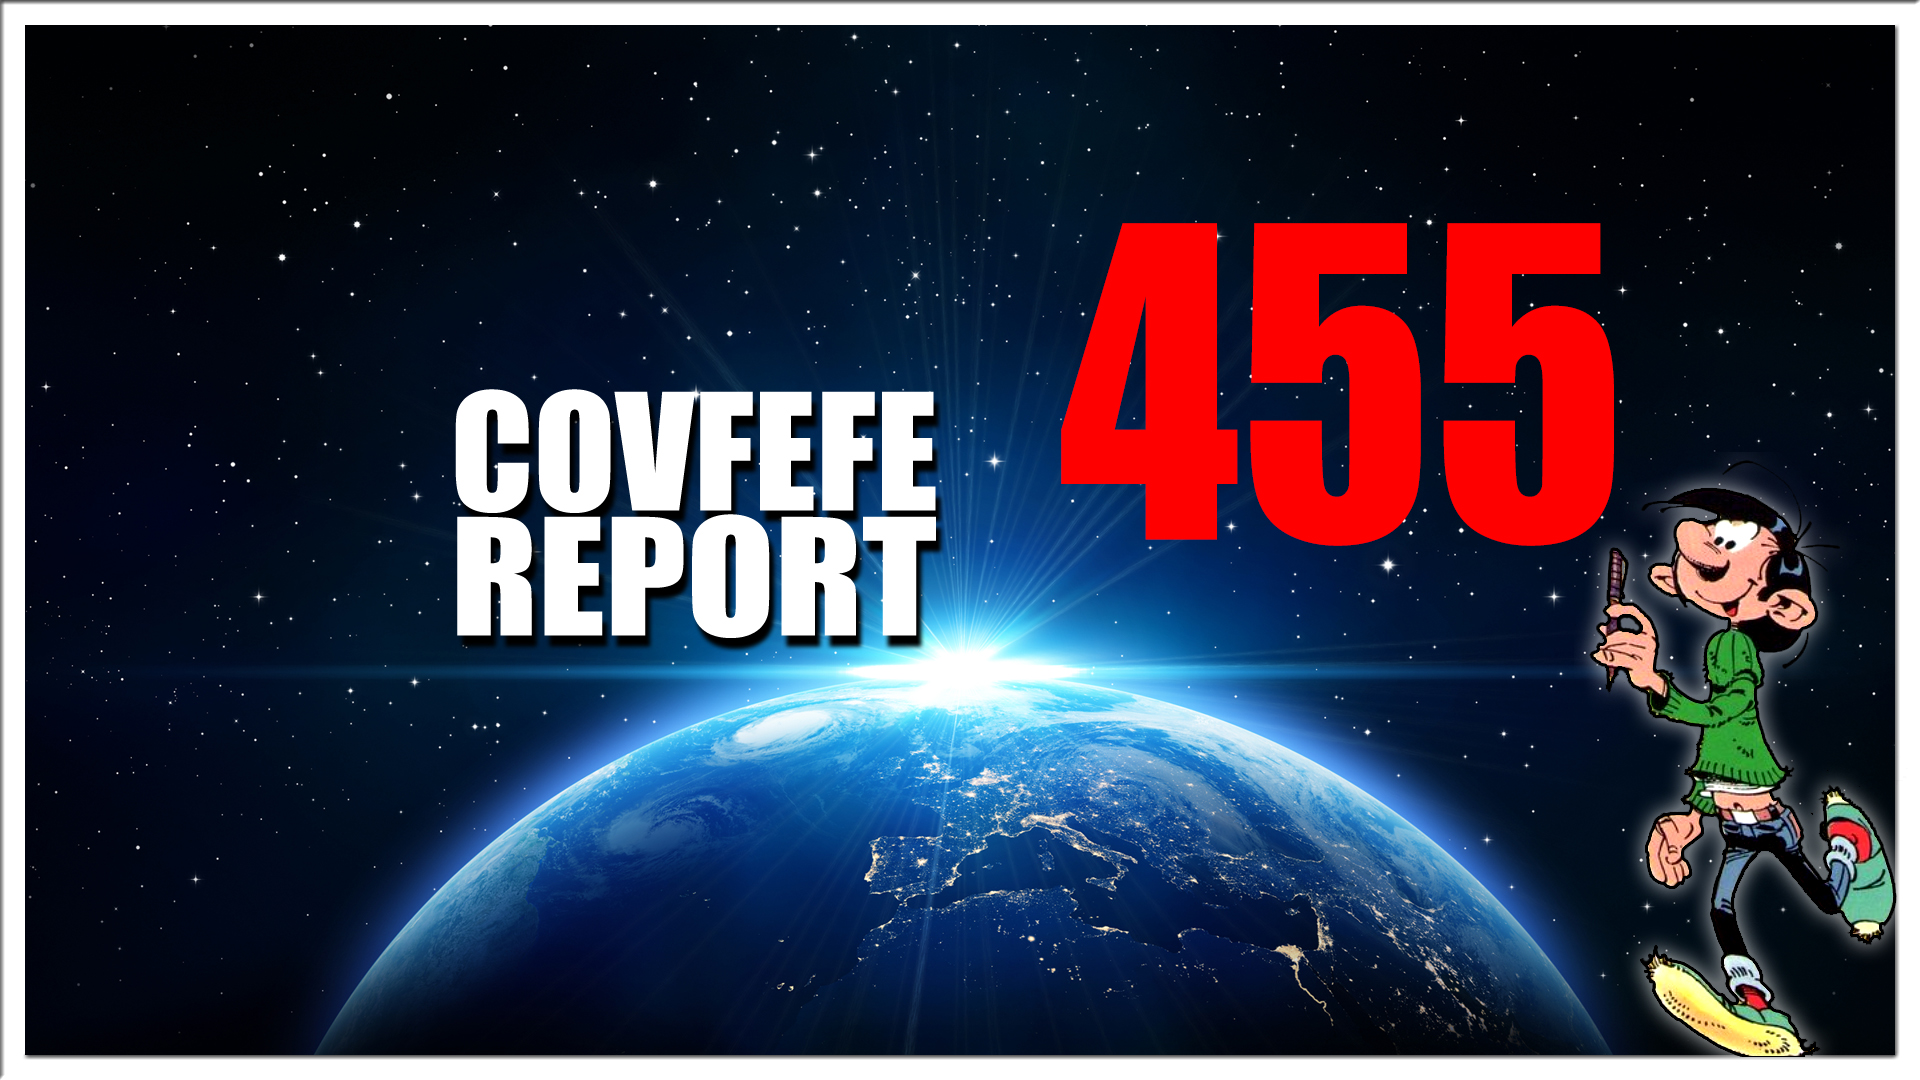 Covfefe Report 455. WRWYLounge, World Wide Demo Amsterdam